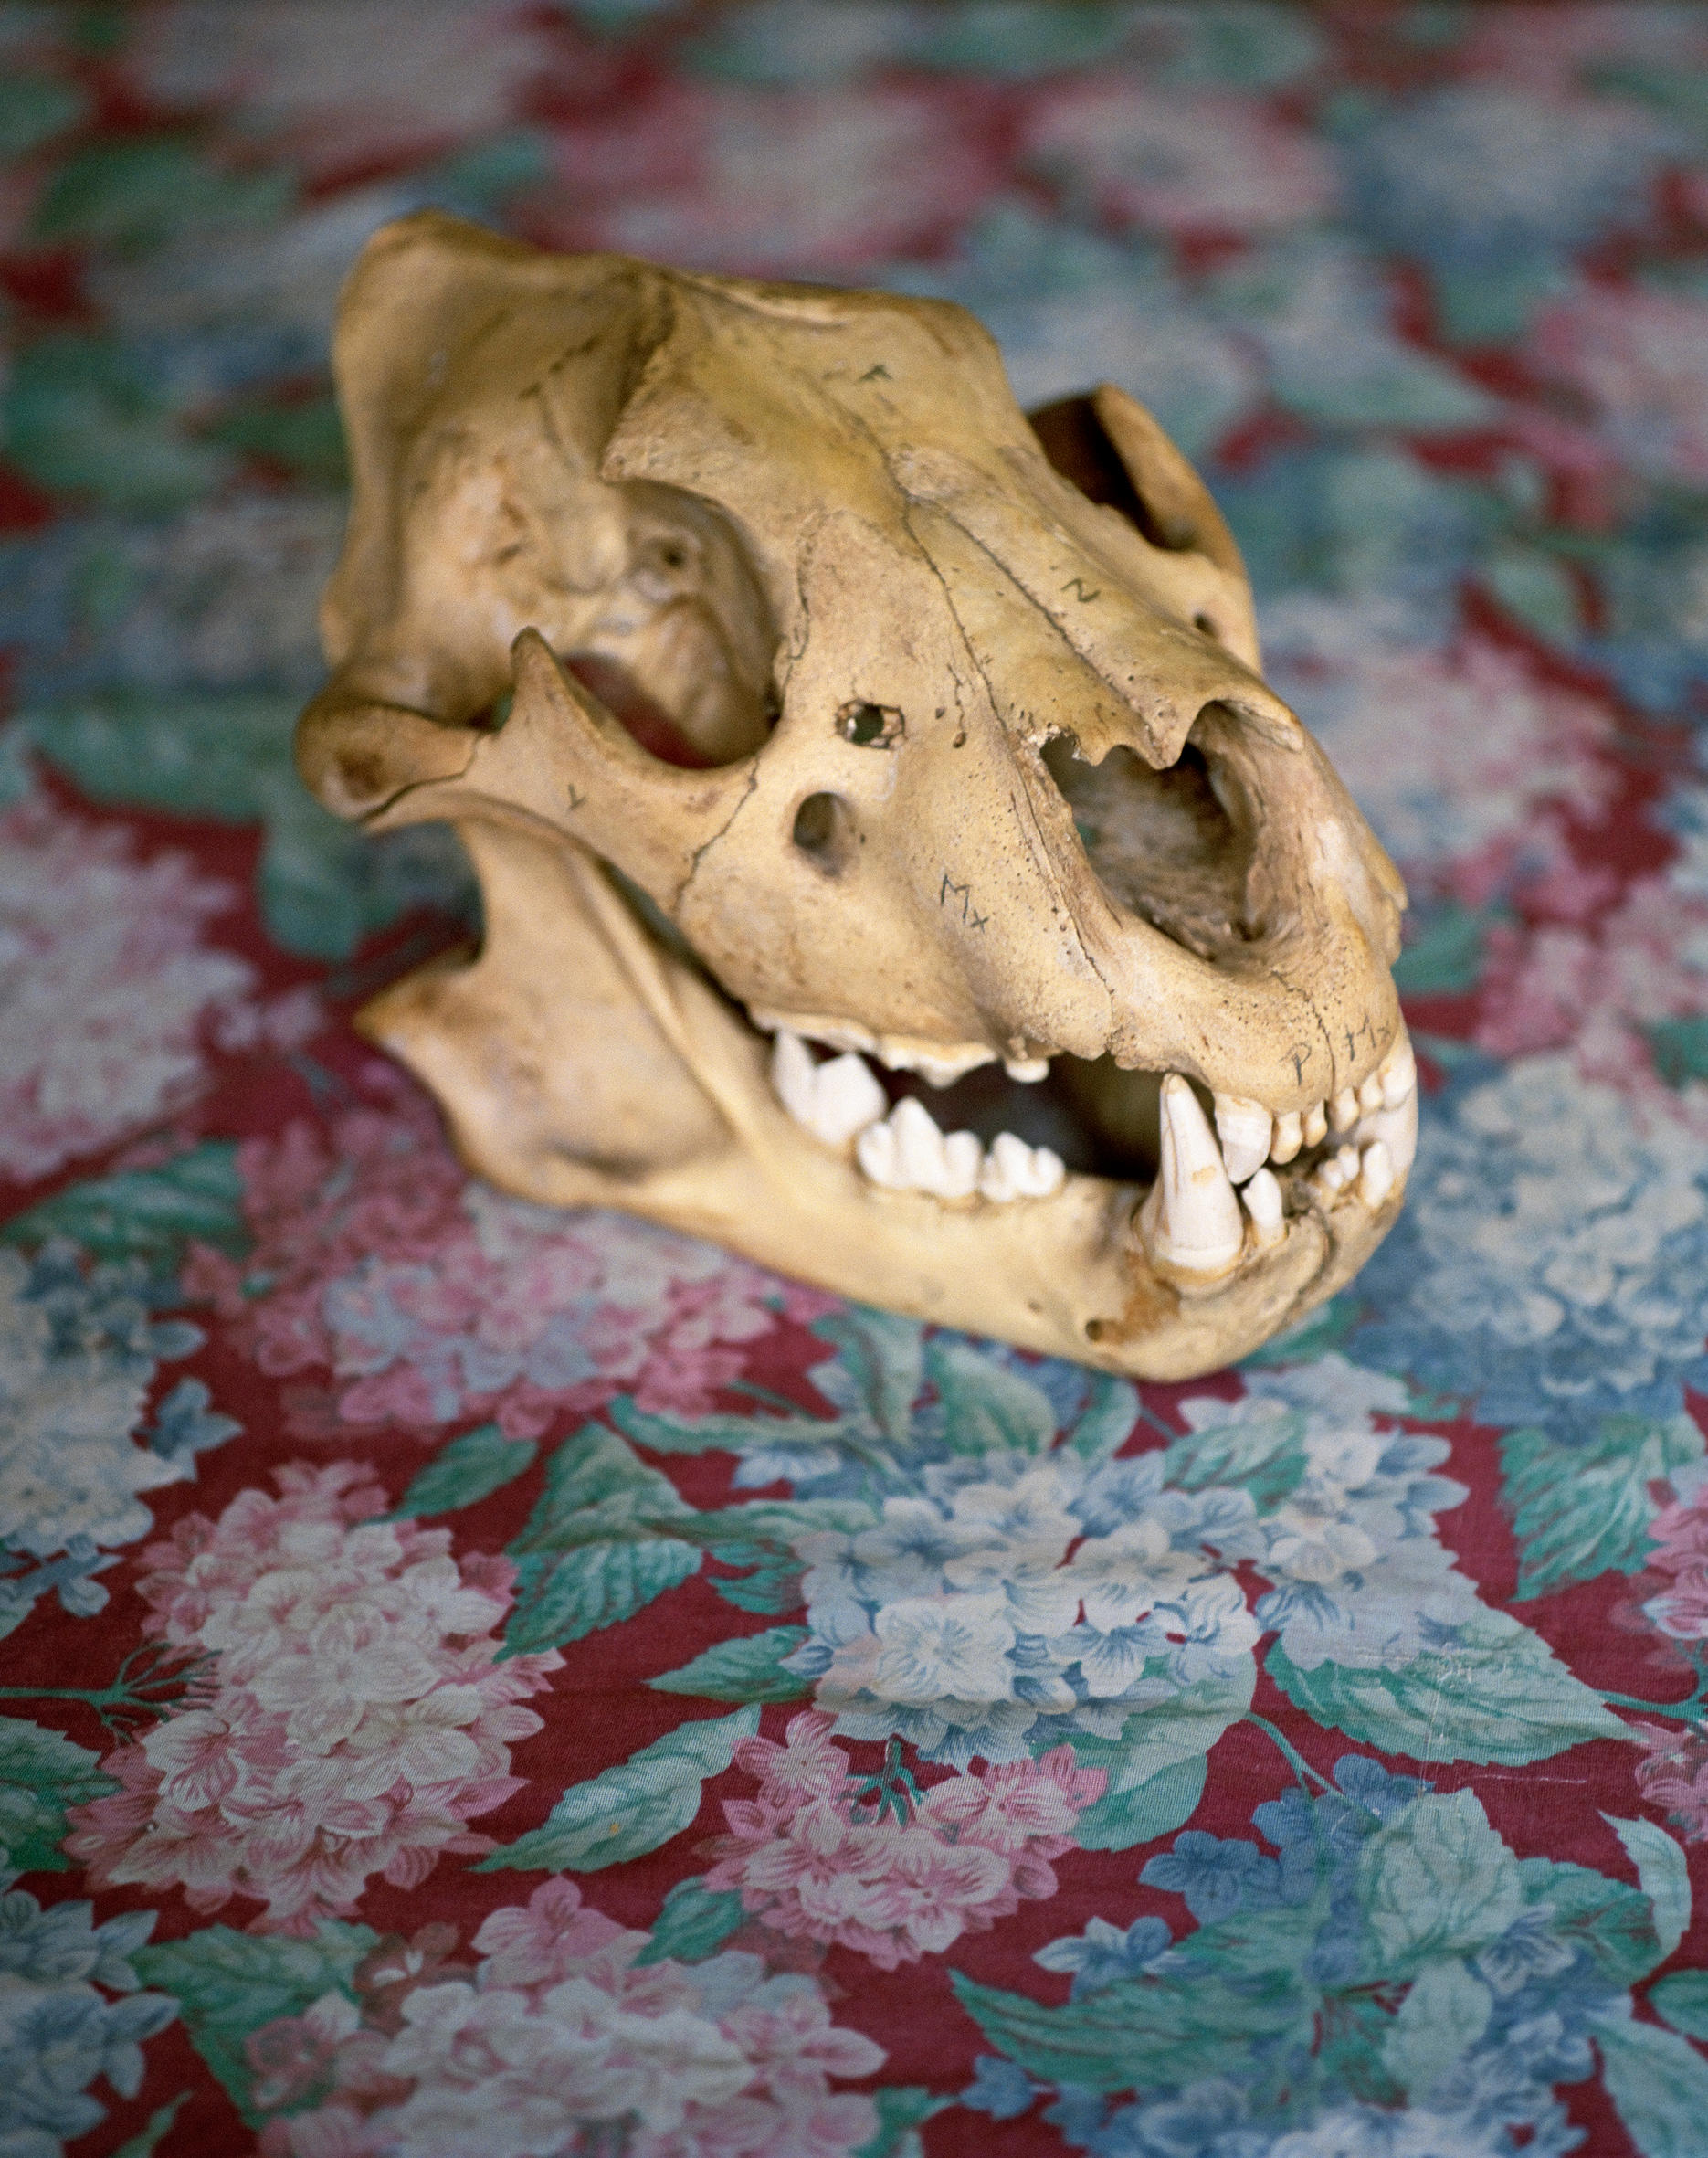 The skull of an animal, placed on a printed cloth.